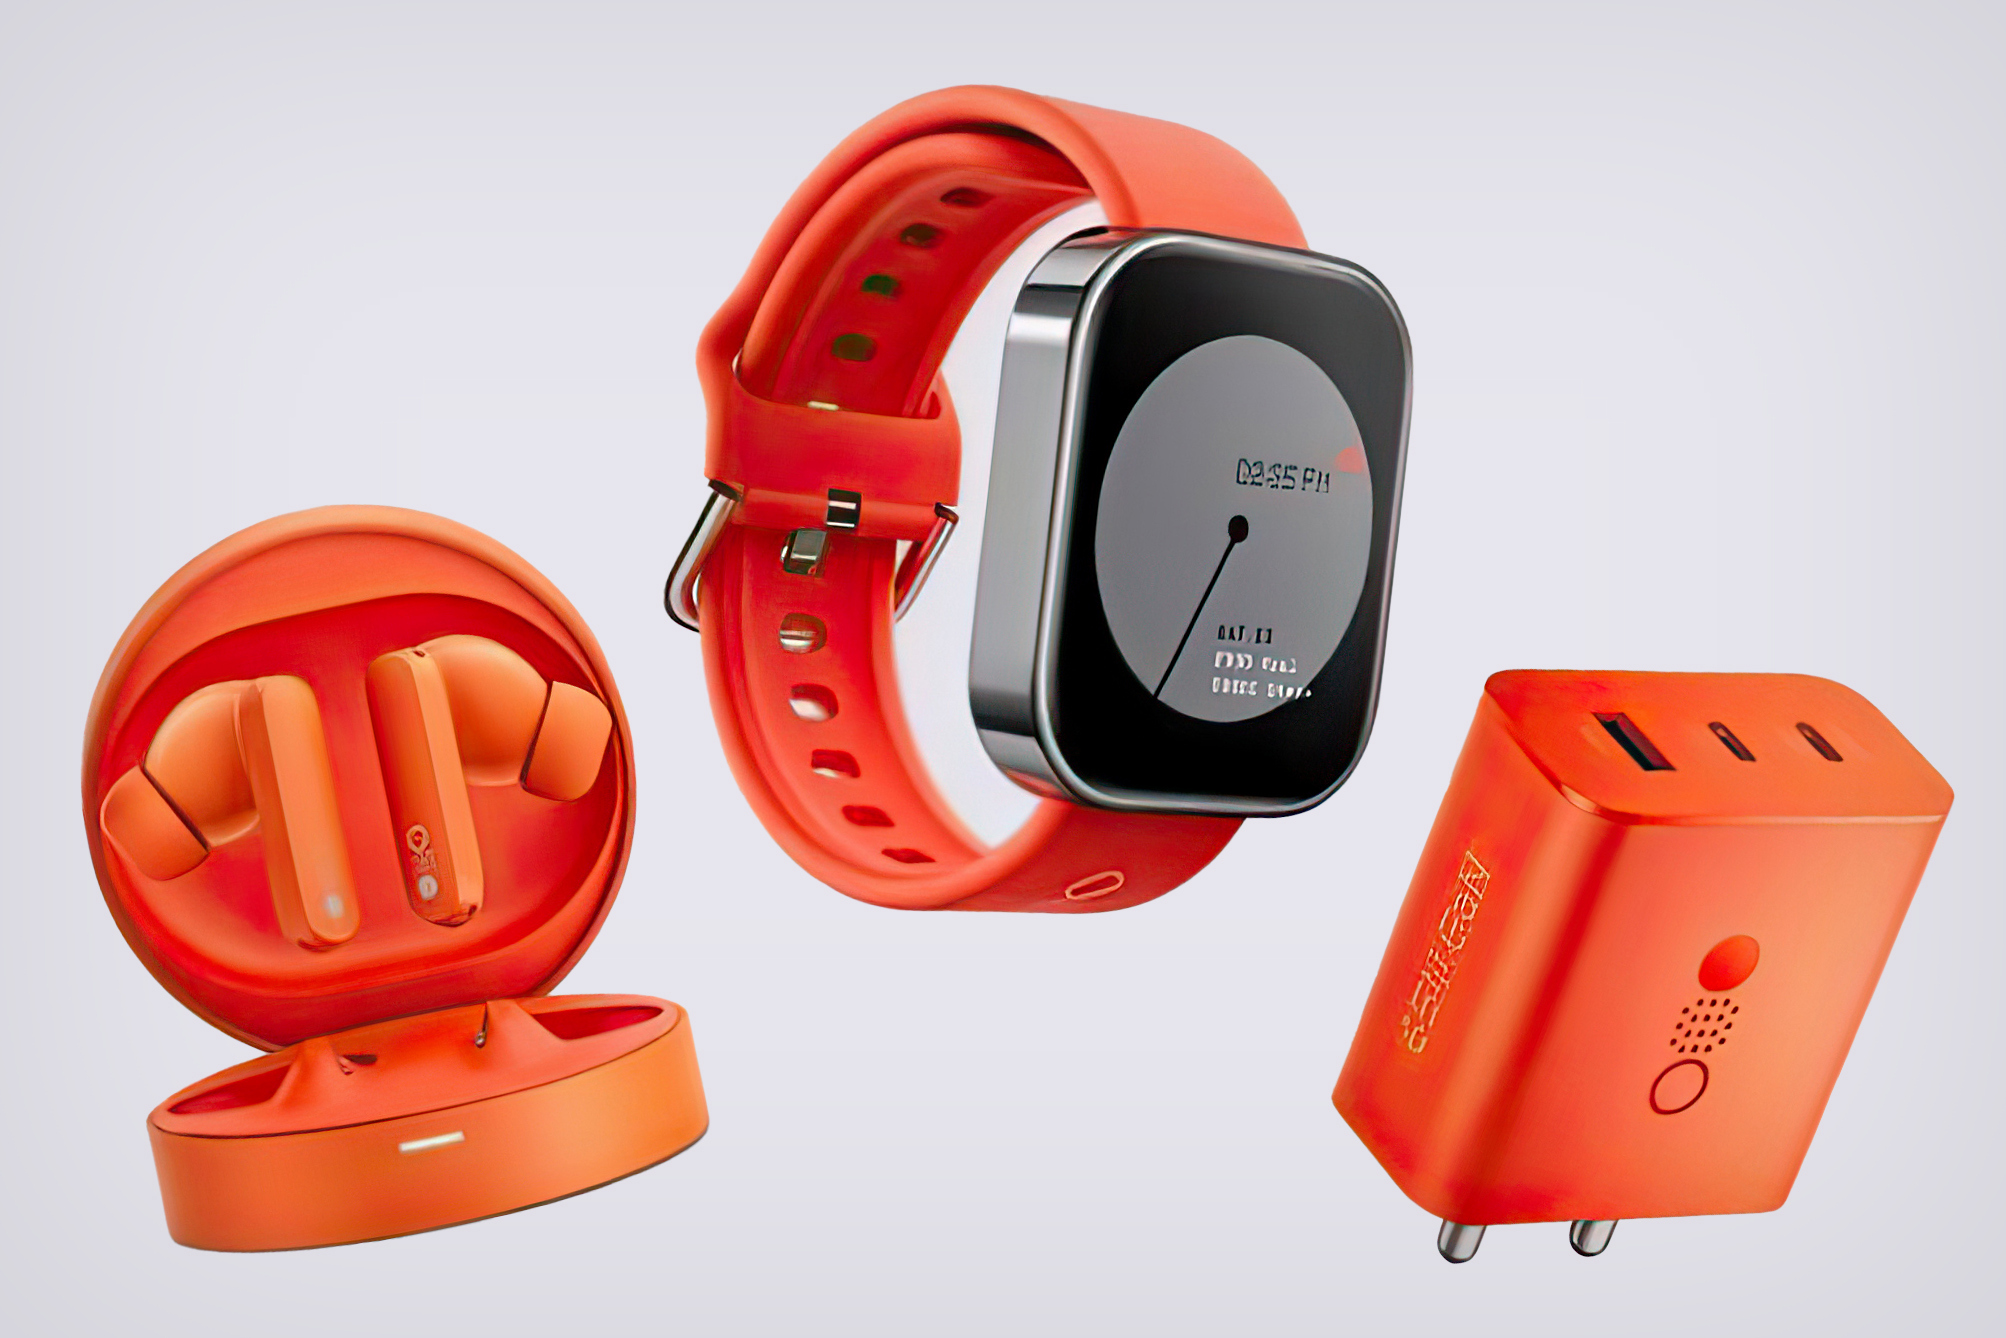 #BREAKING: Carl Pei’s Latest Brand “CMF” is launching a Smartwatch, TWS Earbuds, and GaN Charger